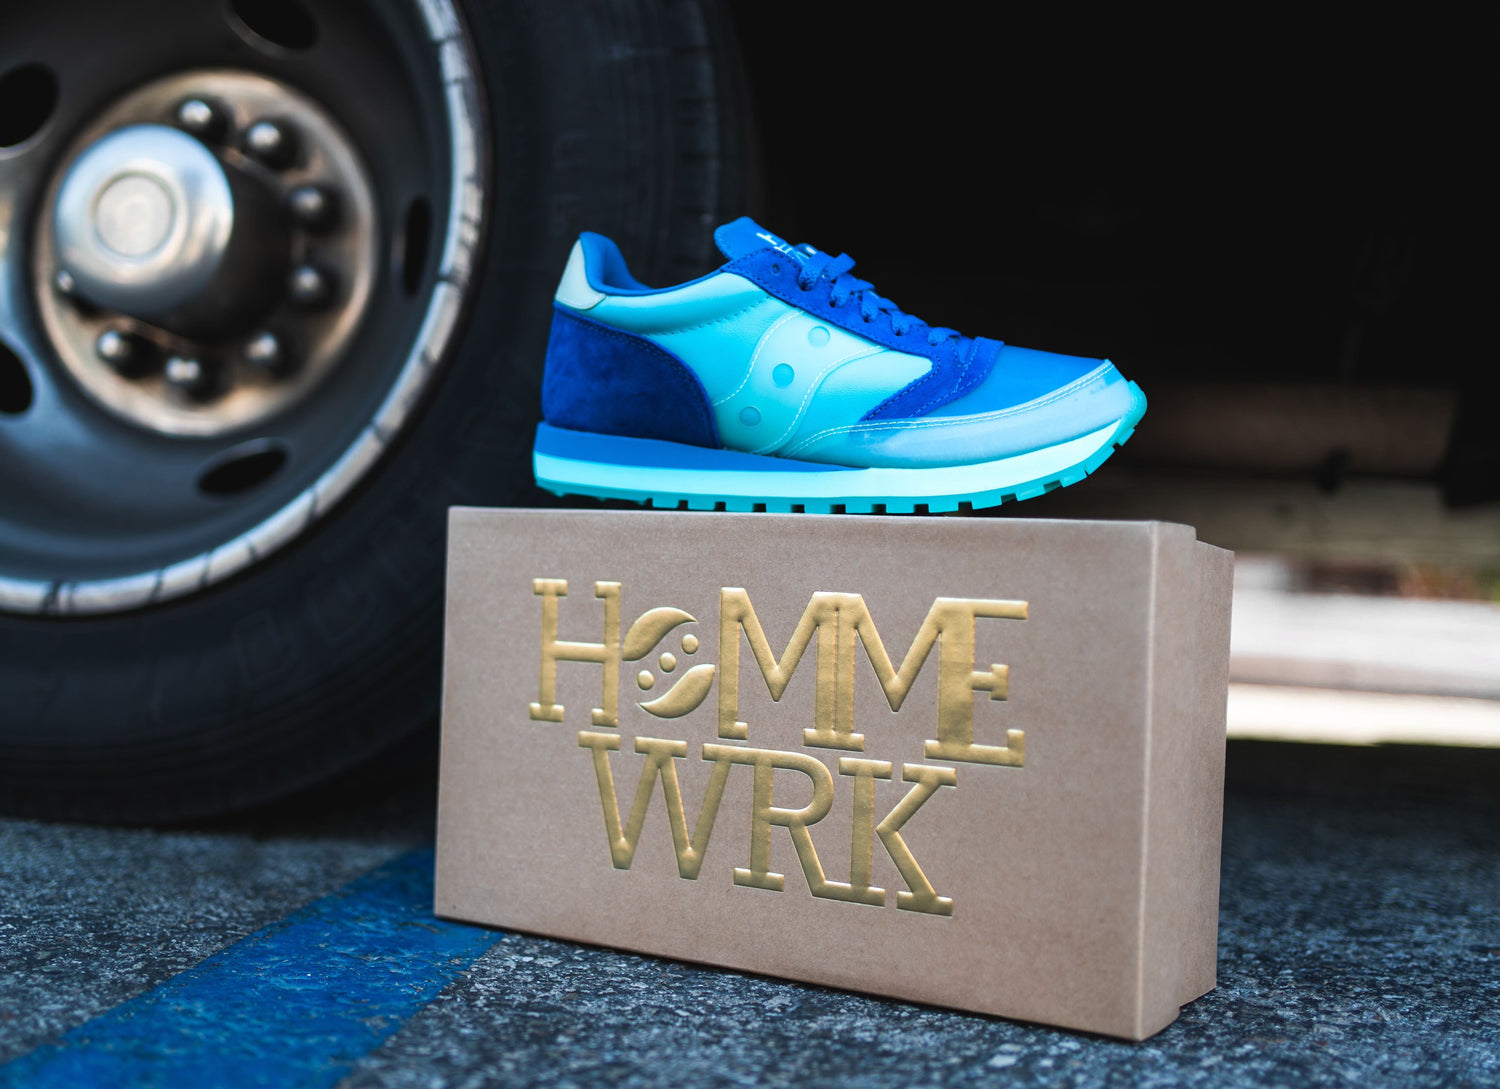 A pair of blue sneakers on top of a brown hommewrk shoe box in front of a cars wheel